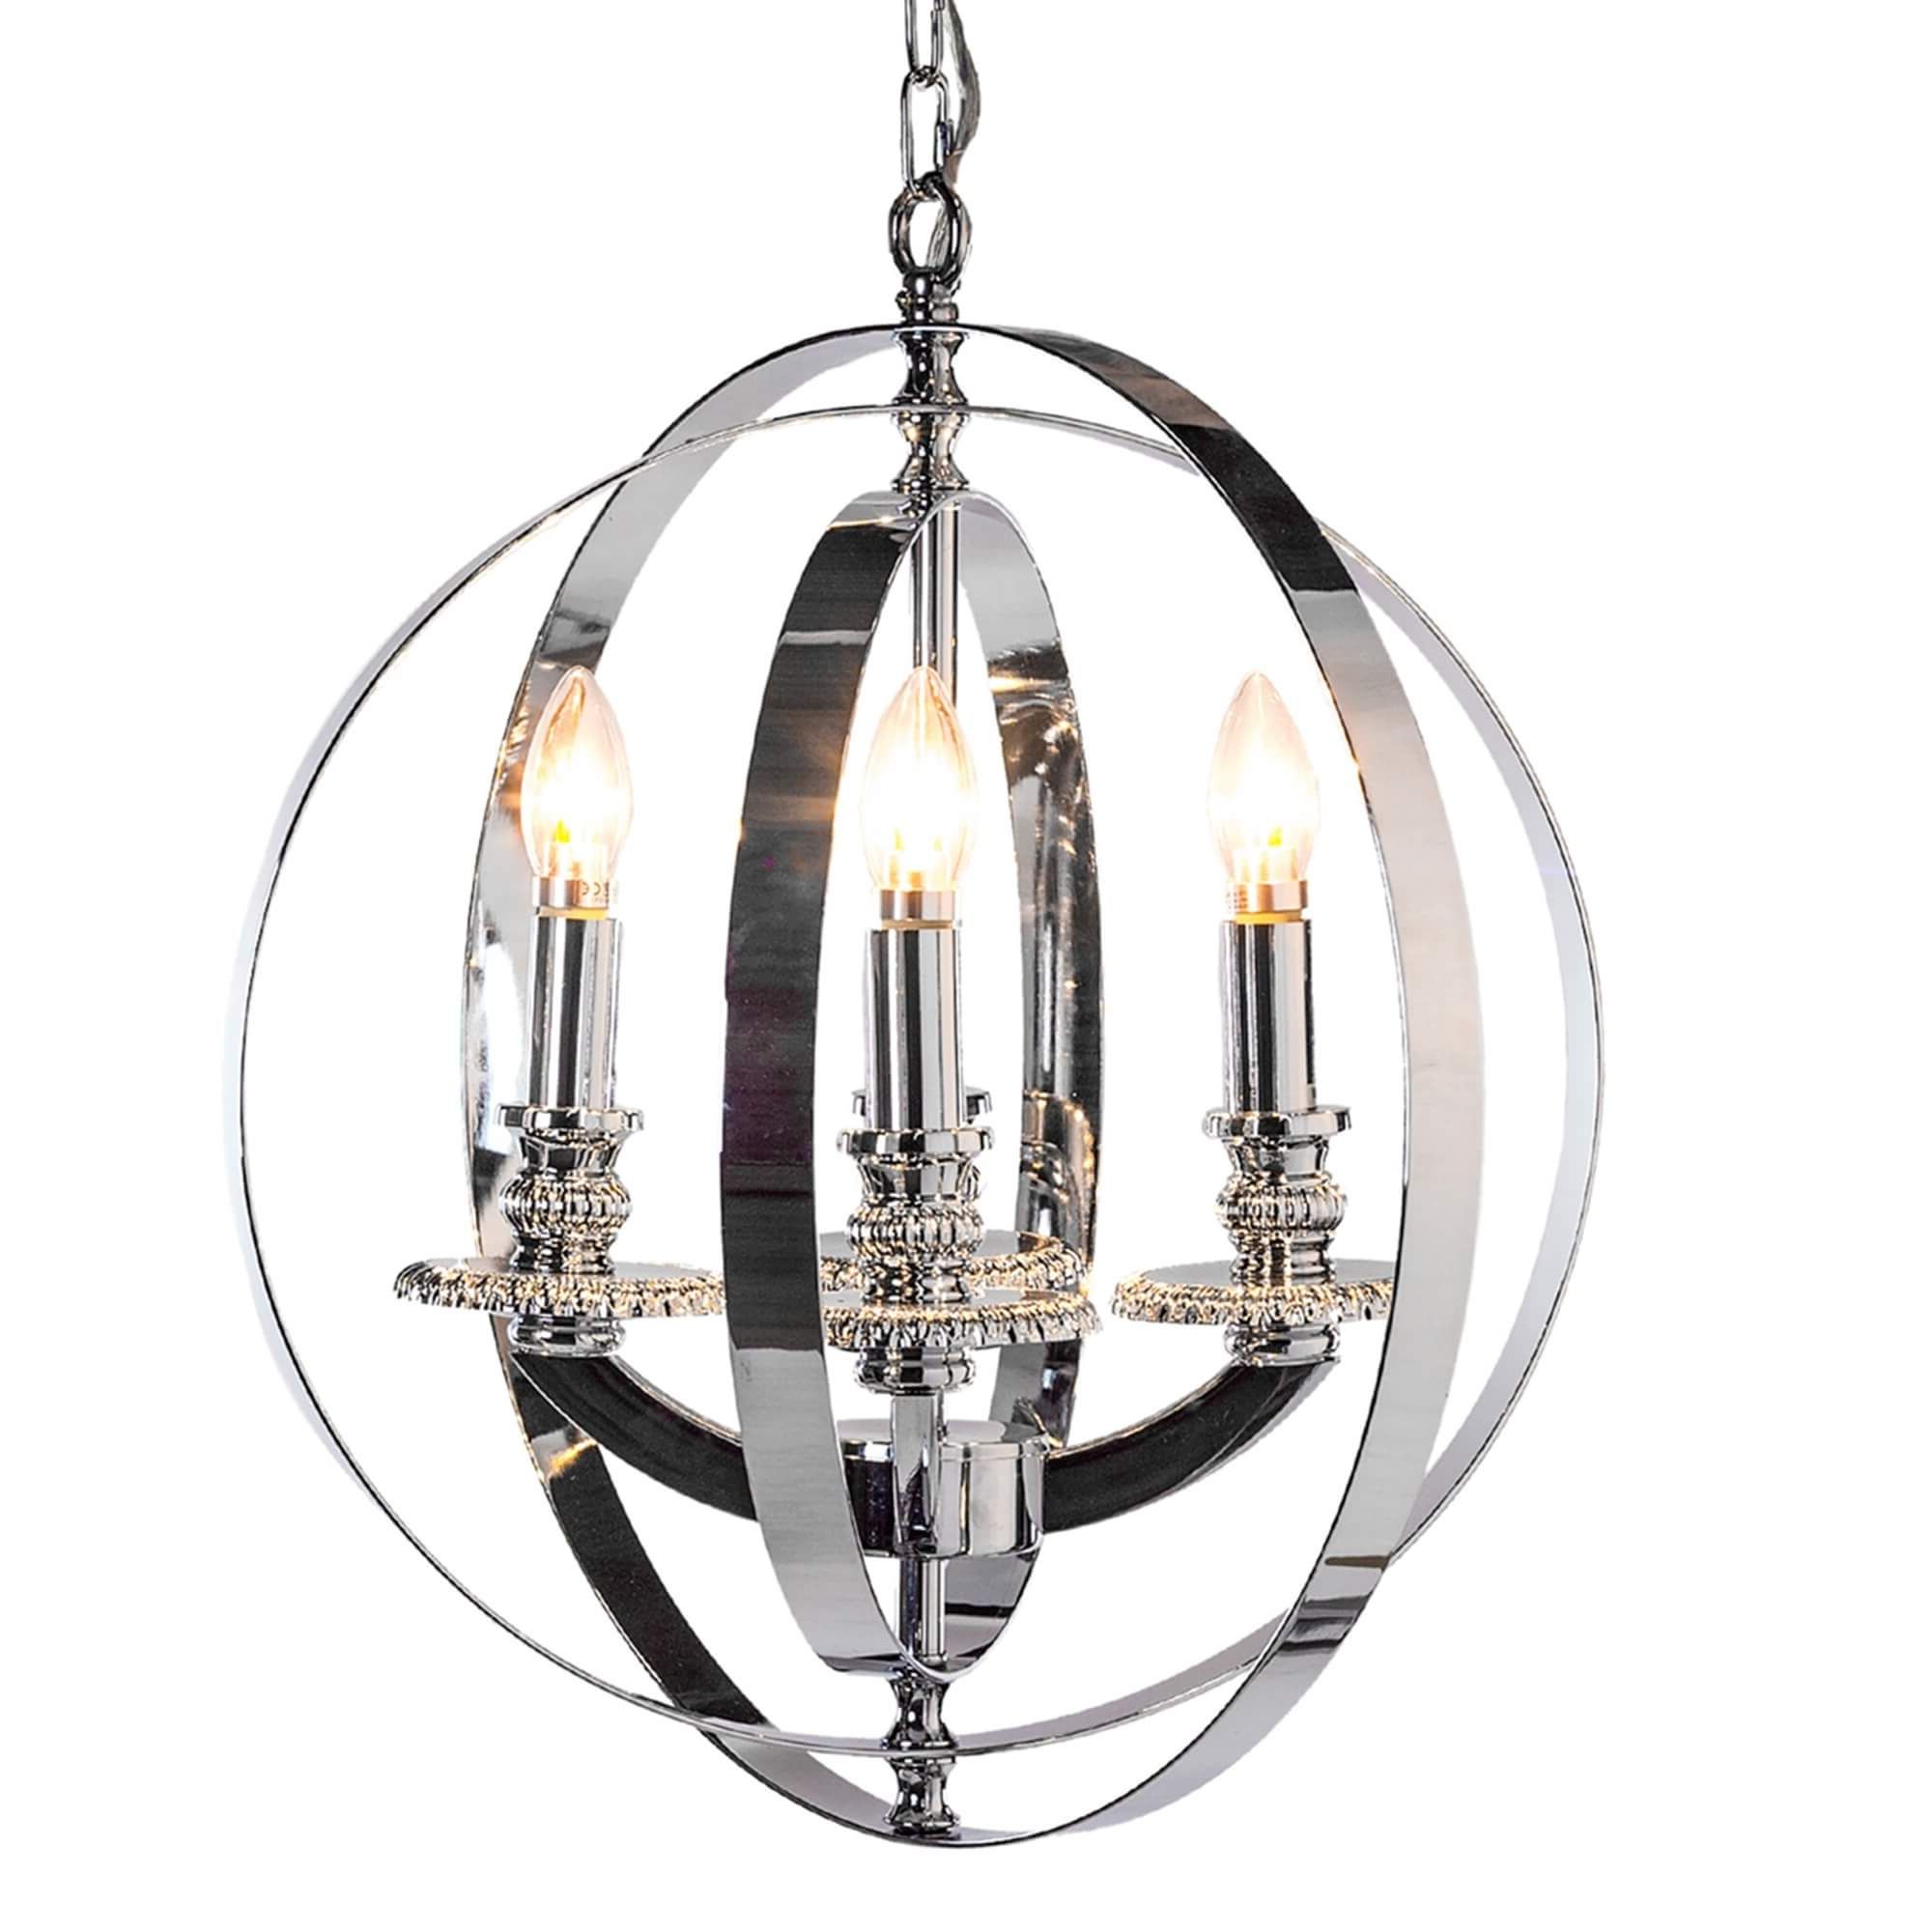 Odelia 3 Way Ceiling Chandelier, Brushed Gold Finish With Regard To Current Antique Gold Three Light Chandeliers (View 5 of 15)